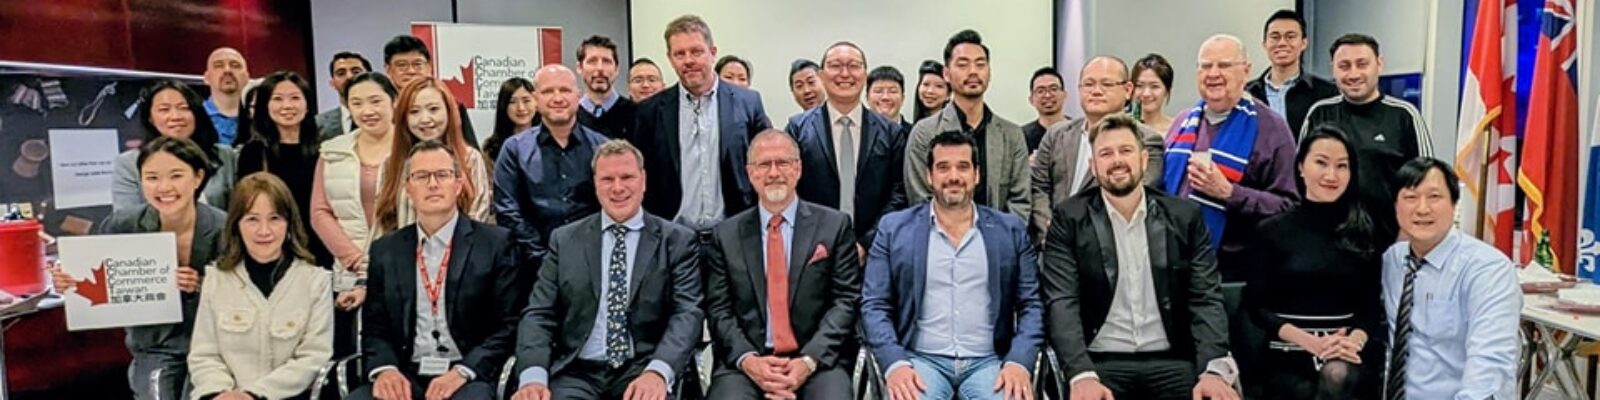 Canadian Chamber of Commerce Board of Directors 2020